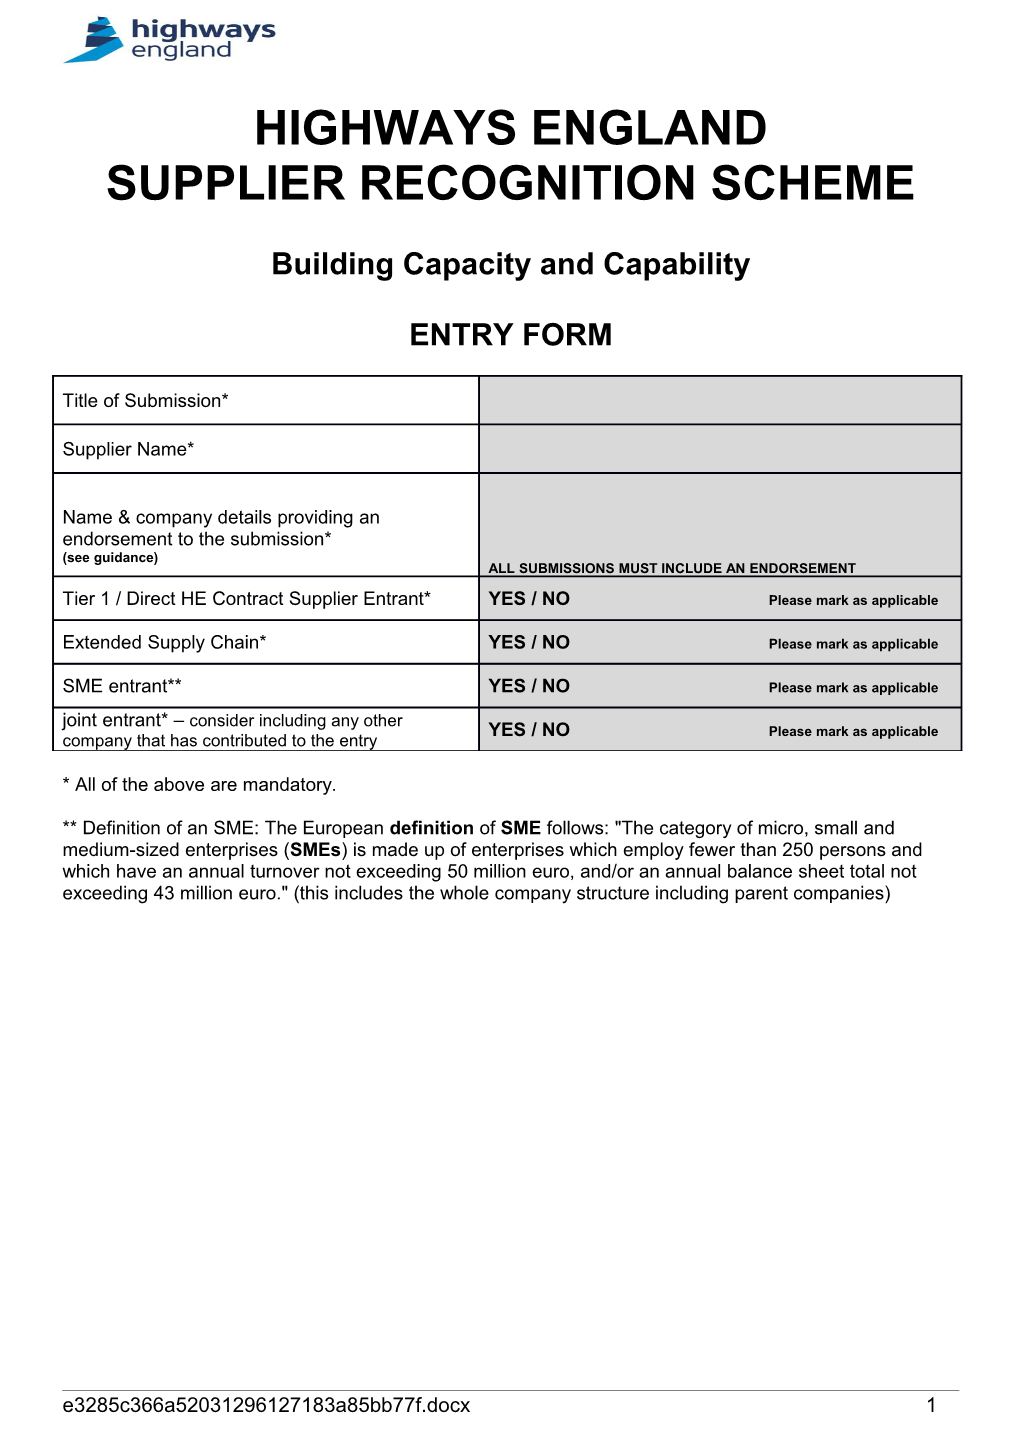 Building Capacity and Capability